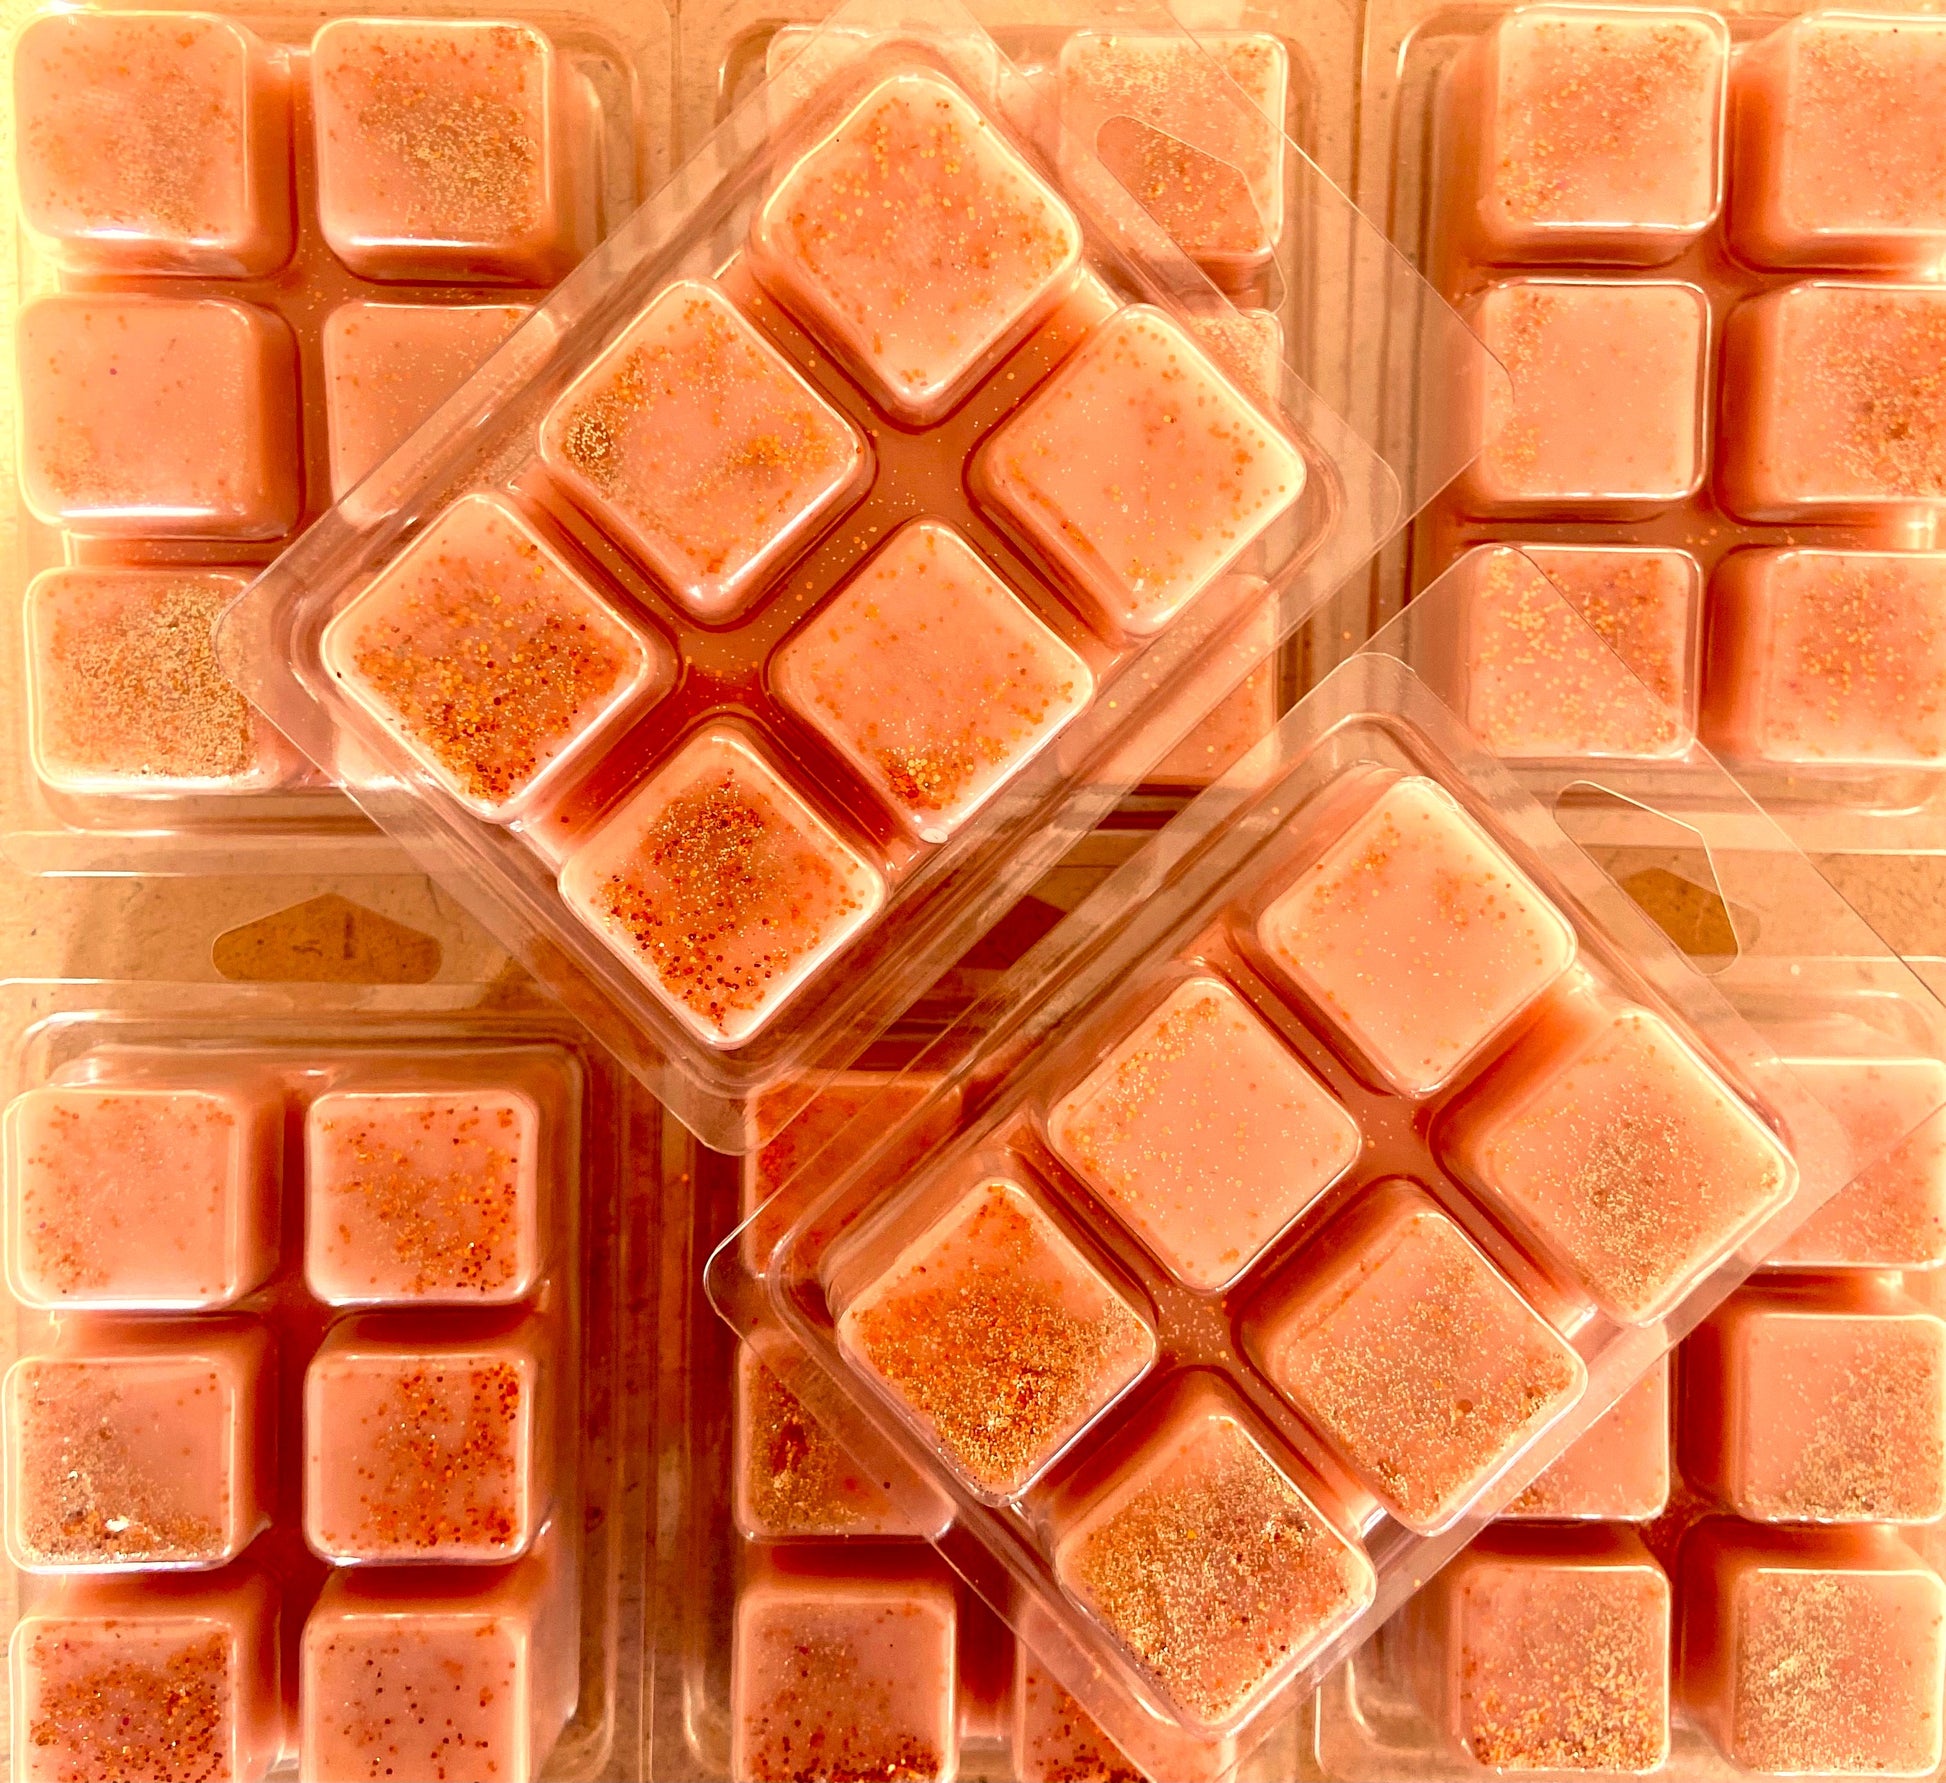 Several plastic clamshell packs containing Sticky Toffee Pudding Wax Melt by The Soap Gal x are arranged closely together.